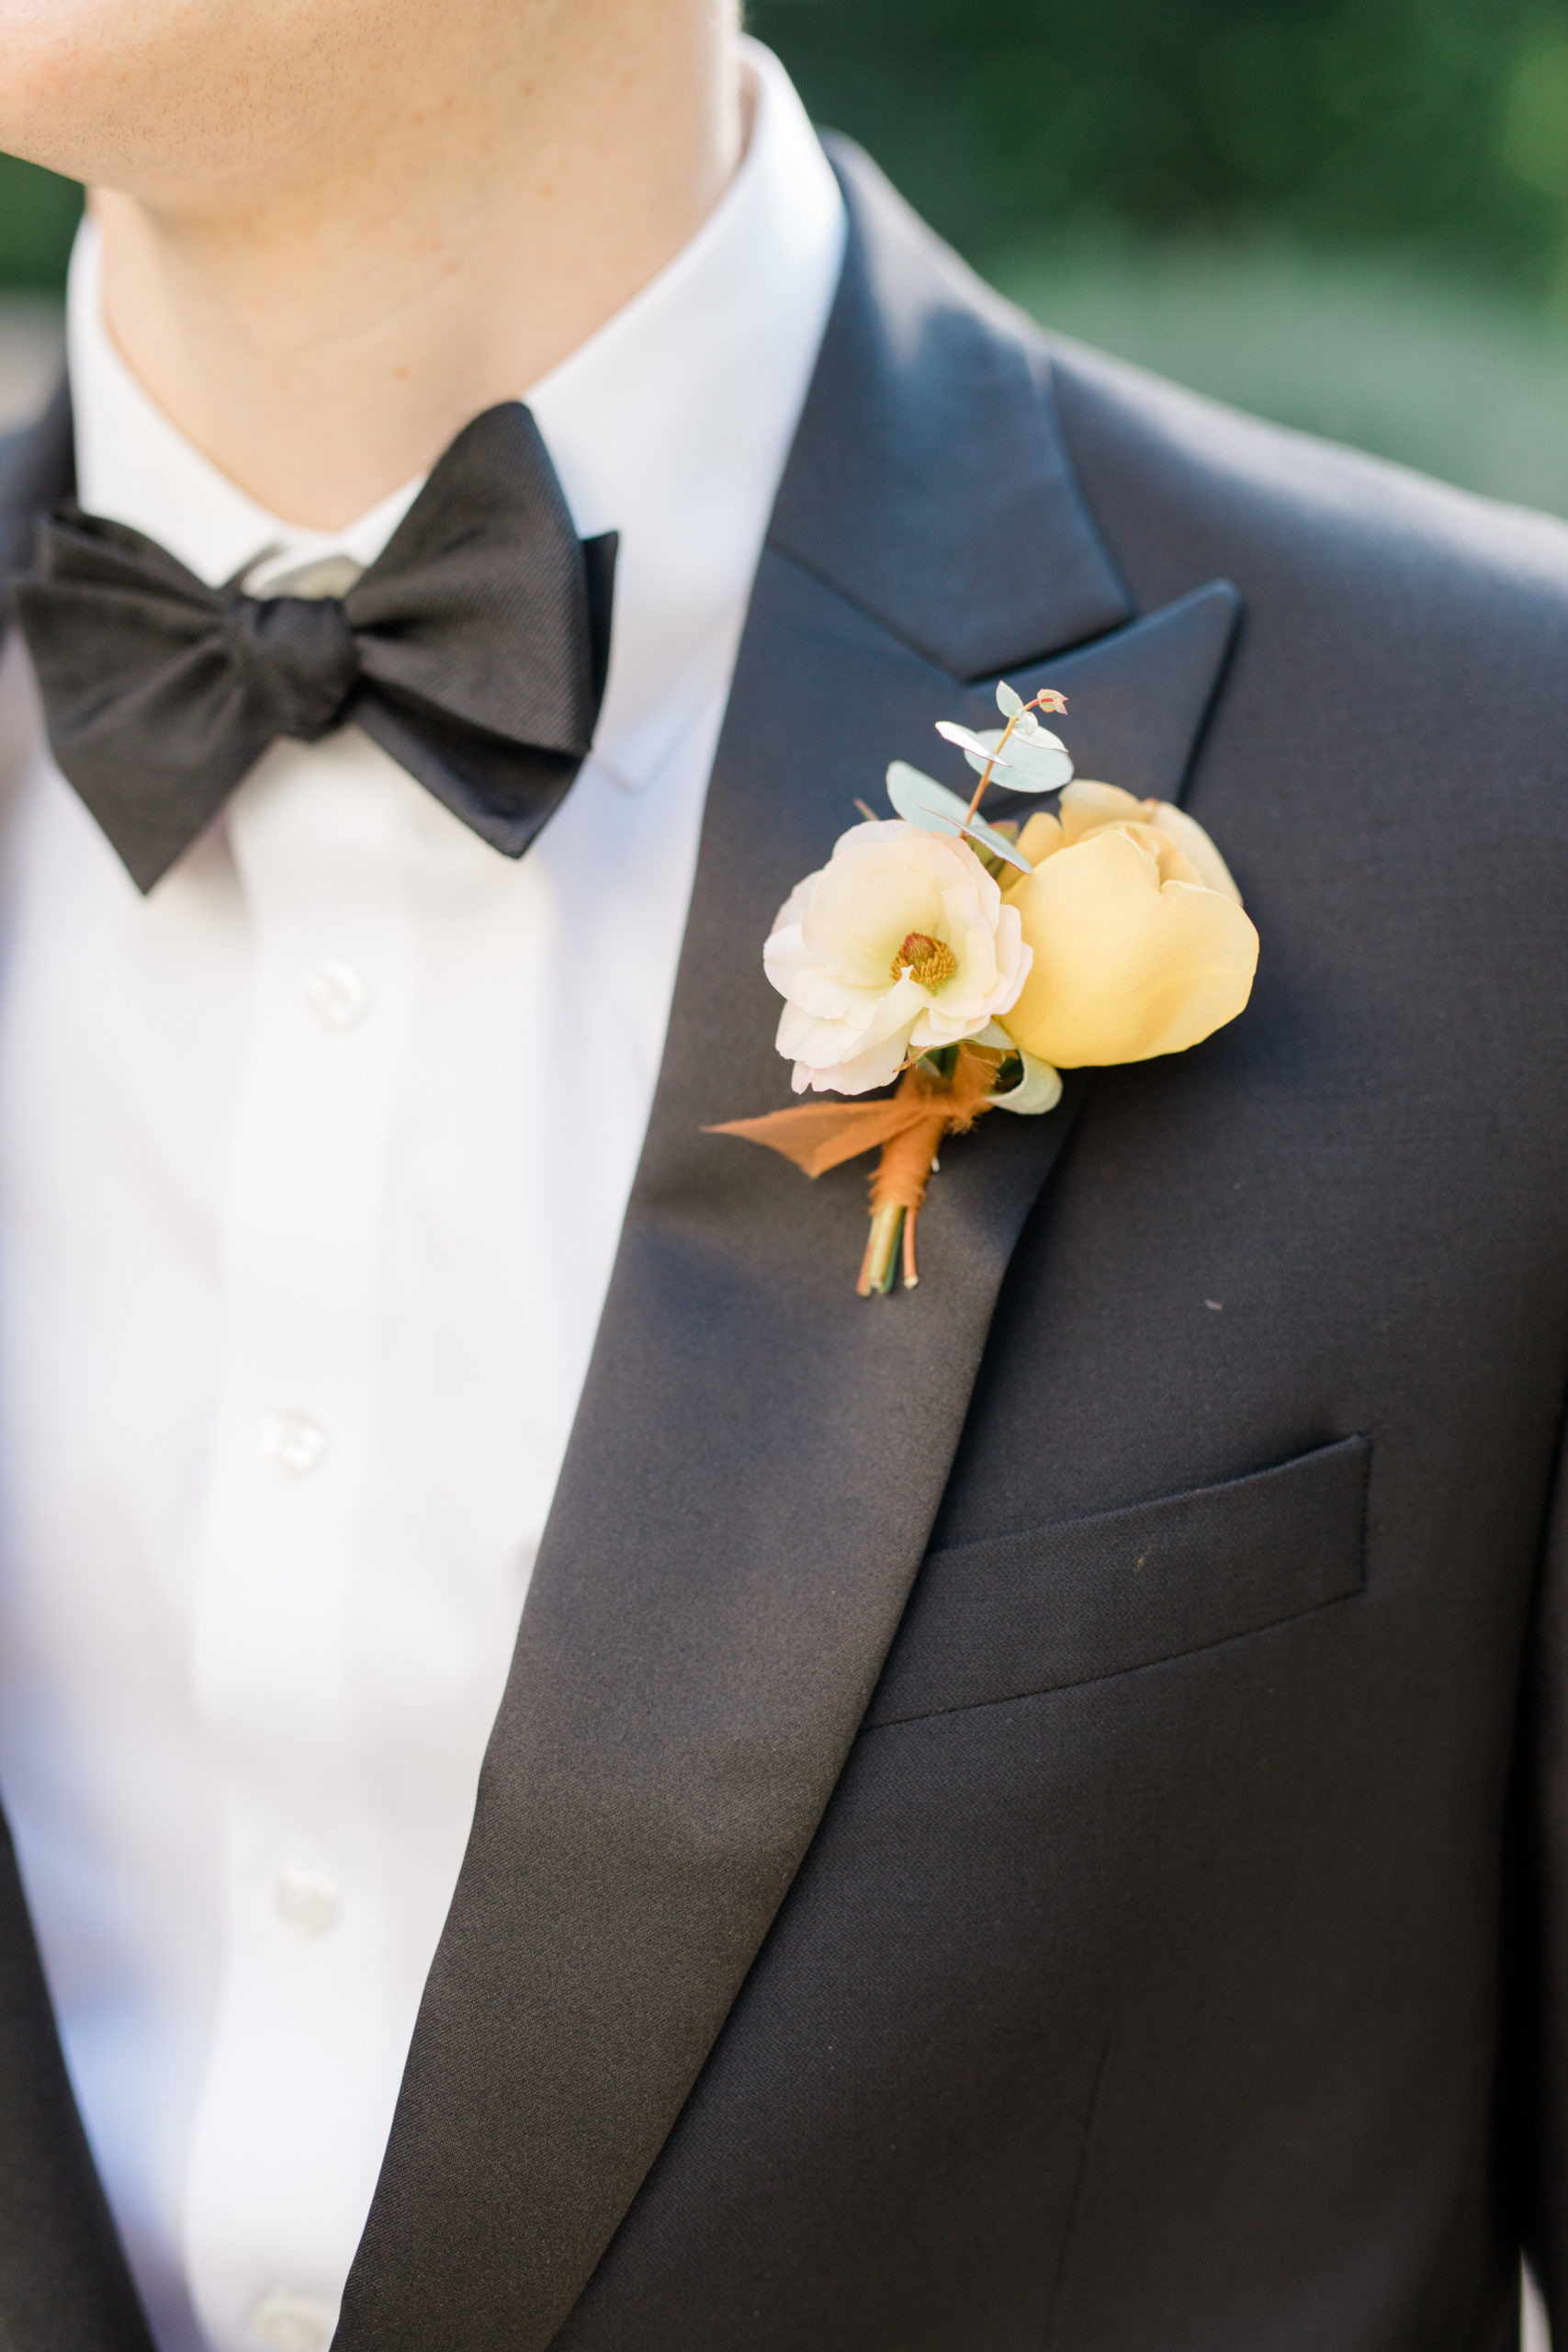 white, yellow and orange boutonniere on a black tuxedo with bow tie